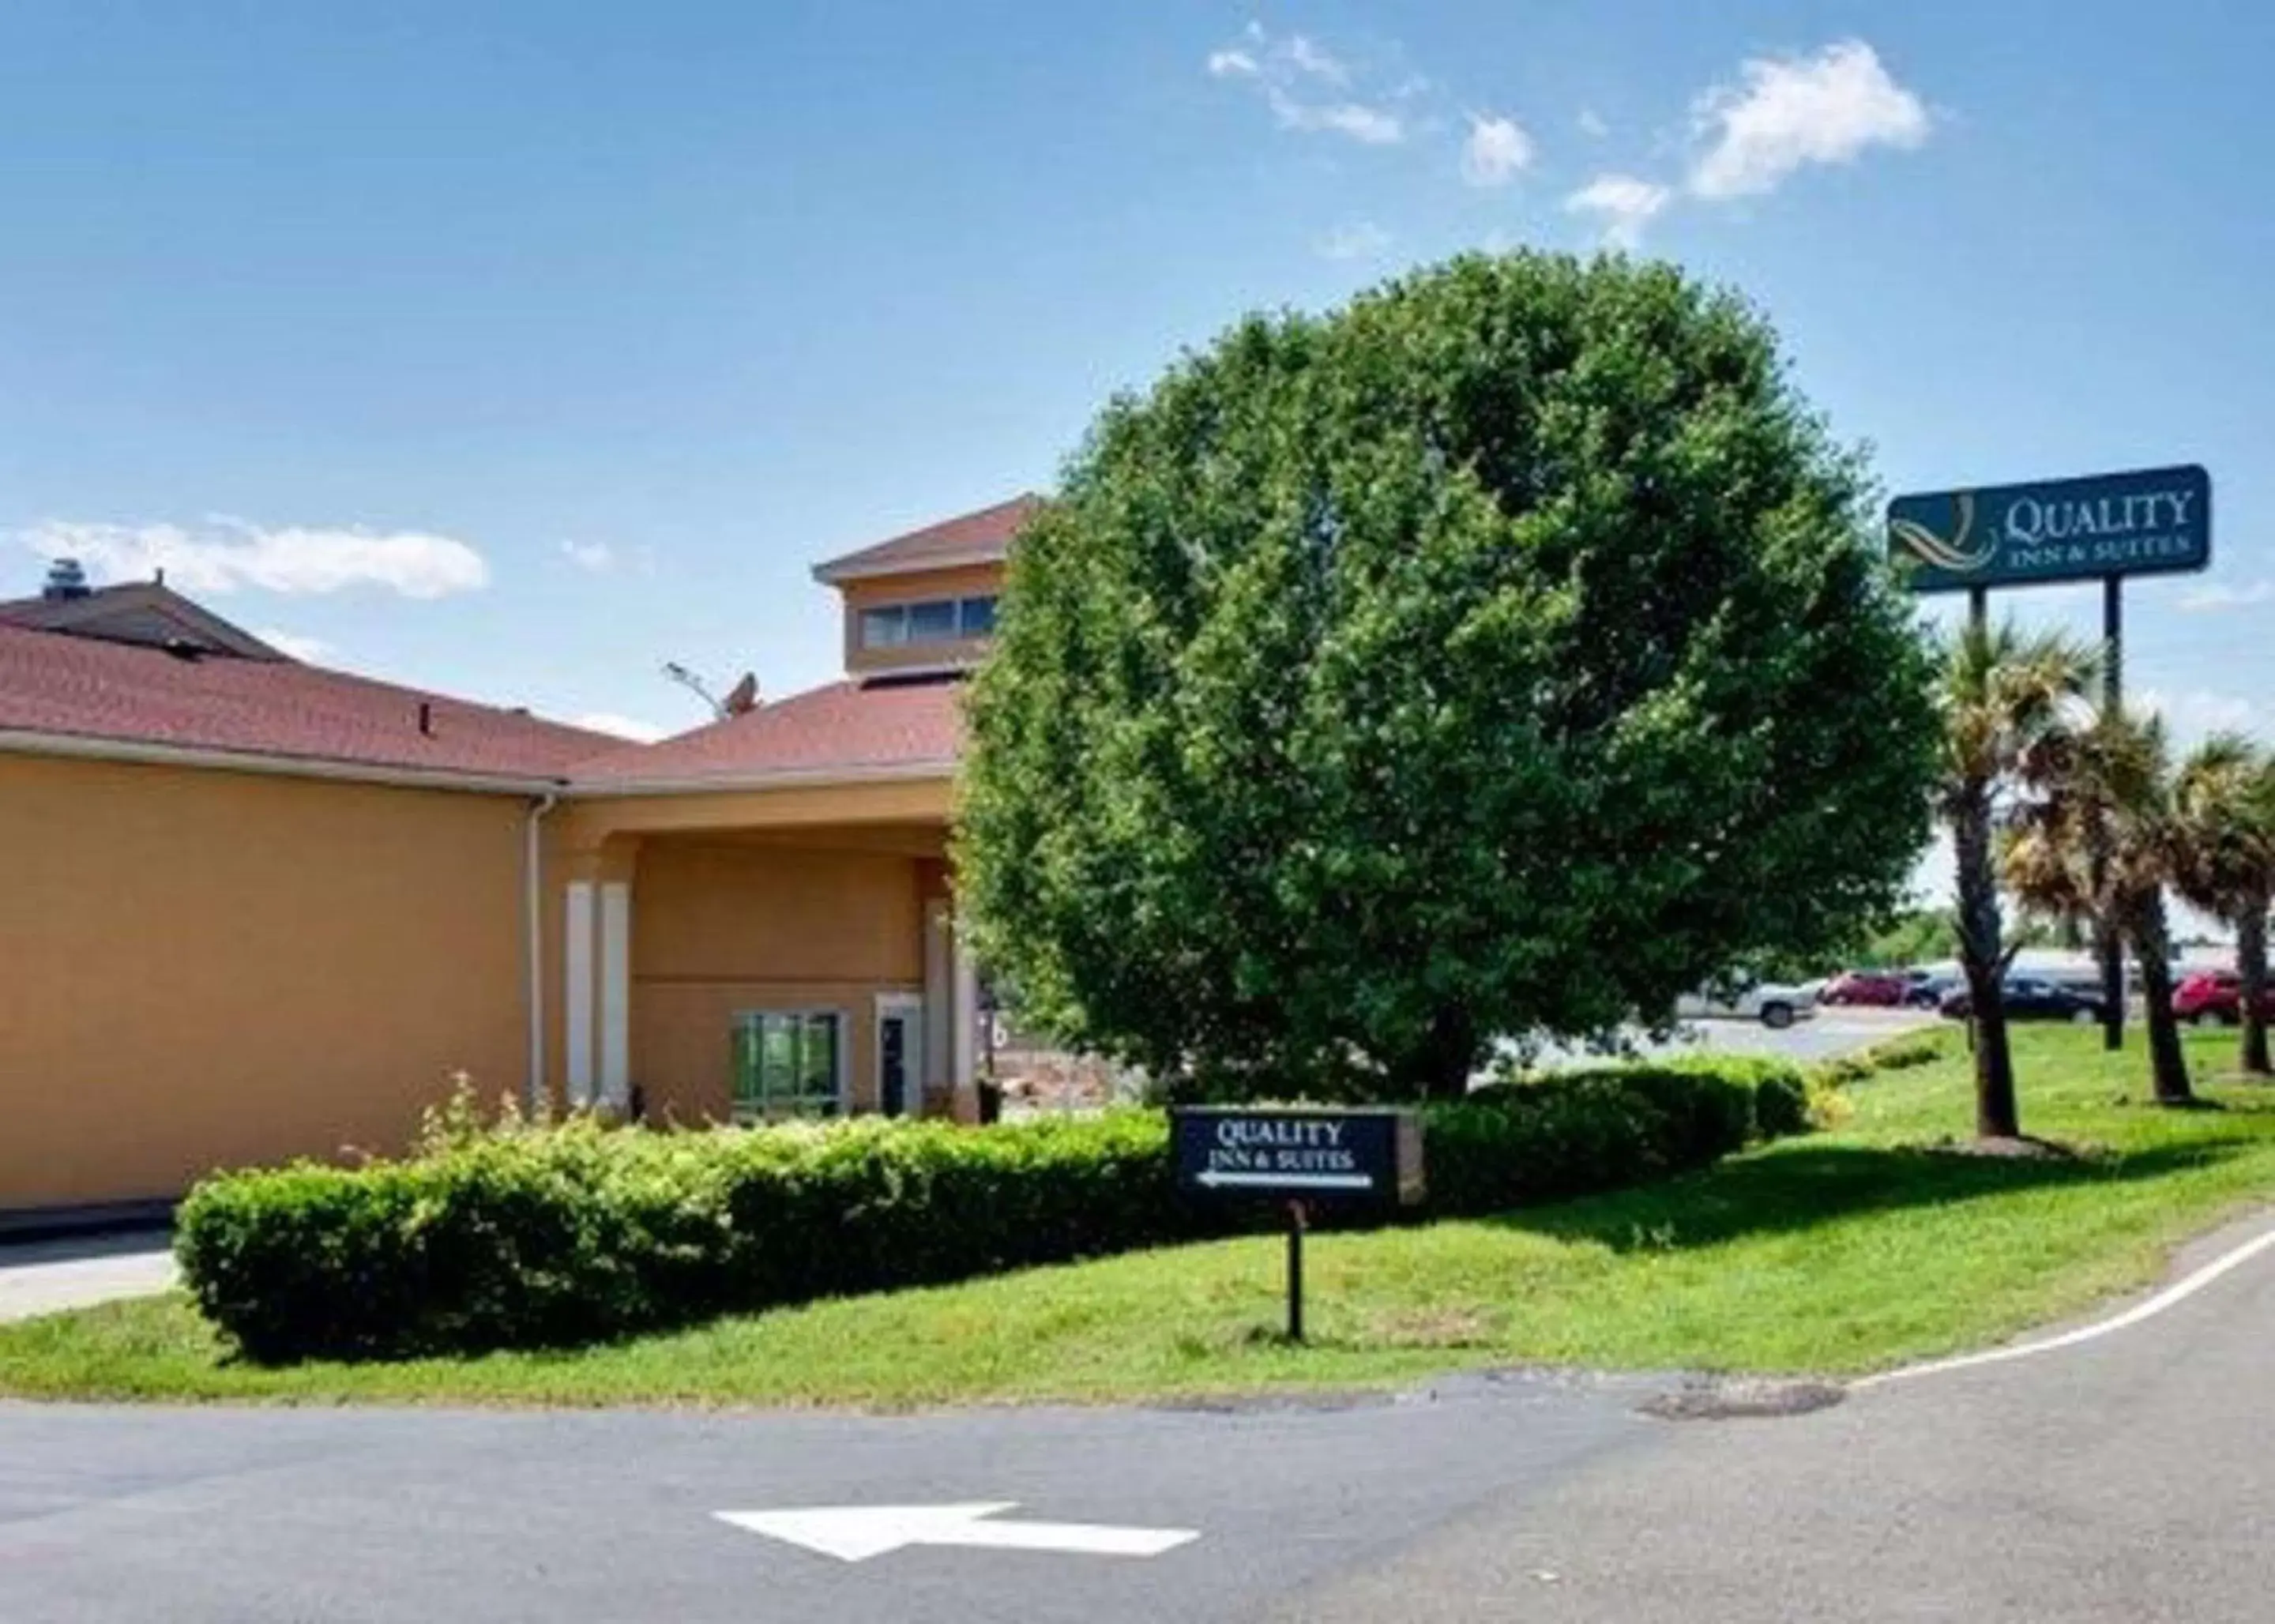 Property Building in Quality Inn & Suites Monroe